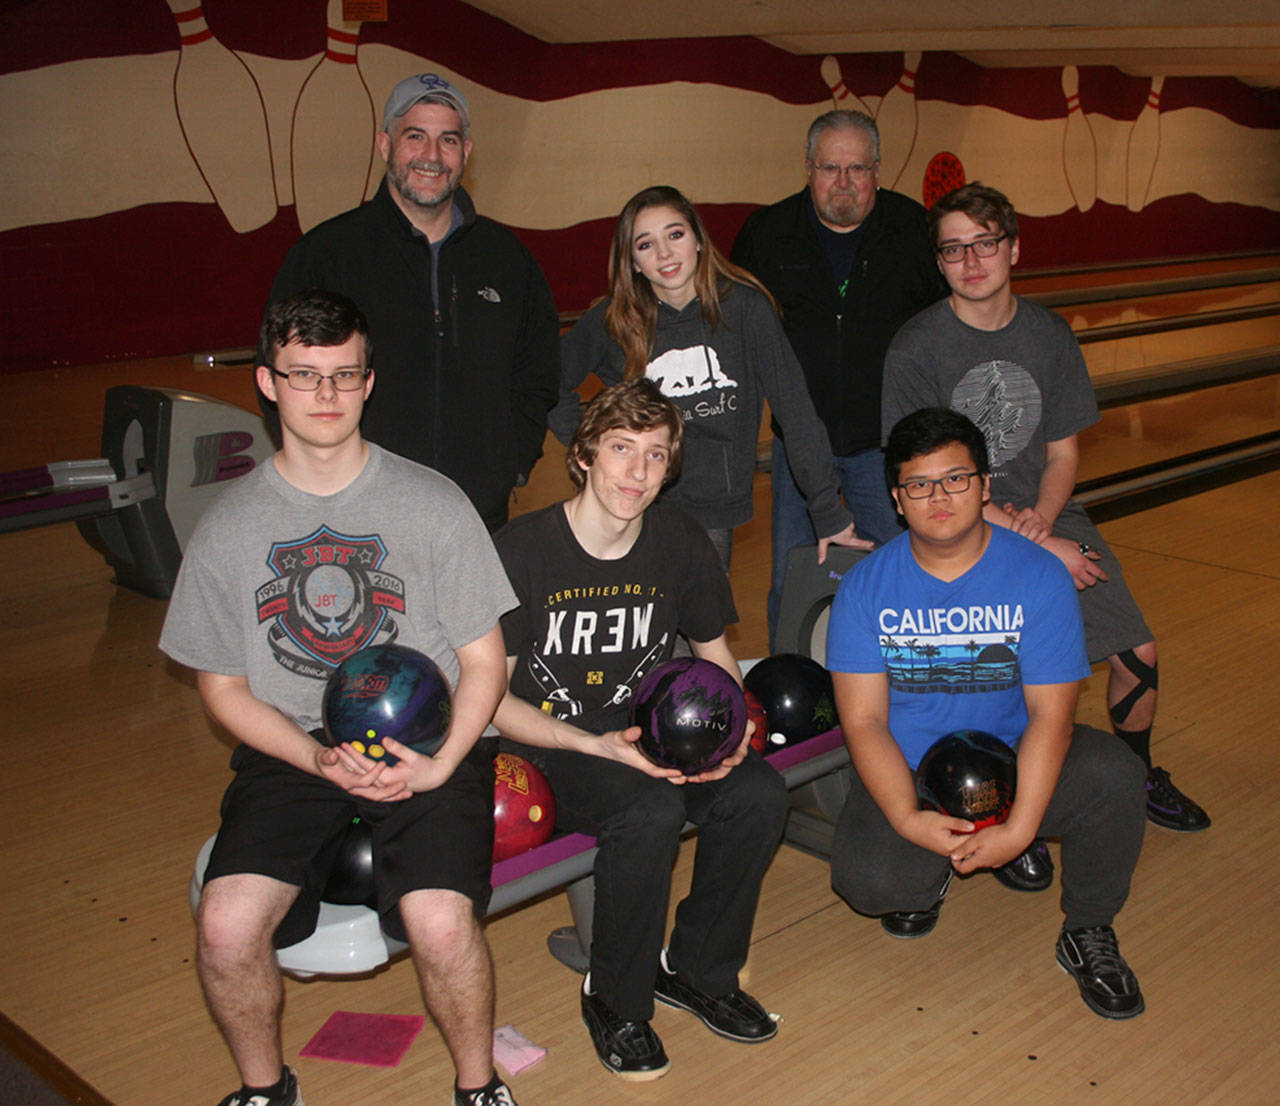 The Oak Harbor High School bowling team will be shooting for the state title next weekend. In the front row are Daniel Johnson, left, Devin McCardle and Earl Angeles. In the back are head coach Jason Youngsman, left, Megan Flood, assistant coach John Youngsman and Niko Hawkins. (Photo by Jim Waller/Whidbey News-Times)